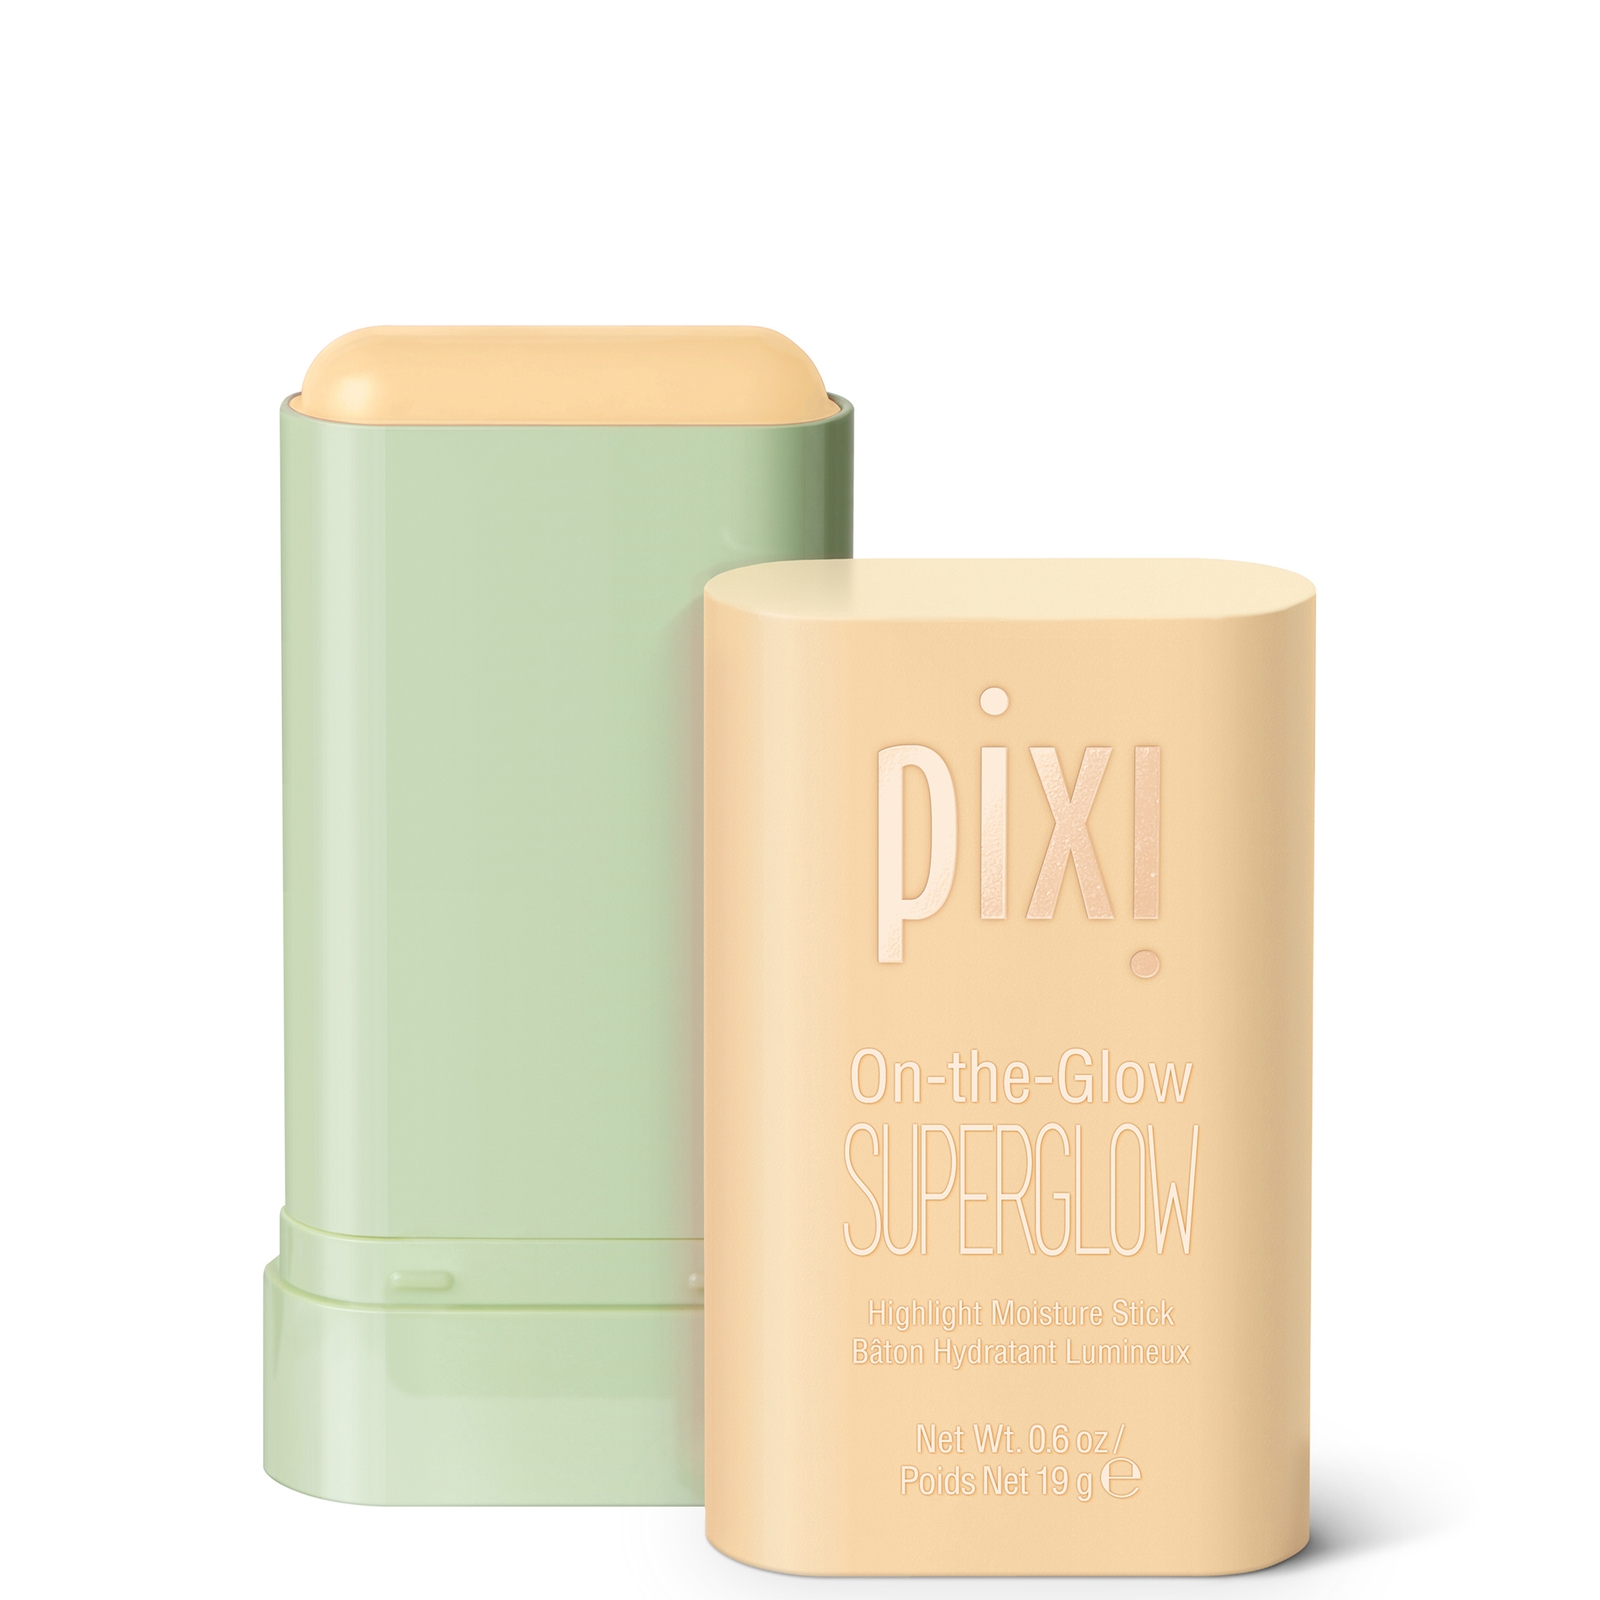 Pixi On-the-glow Superglow Highlighter 19g (various Shades) - Gildedgold In White